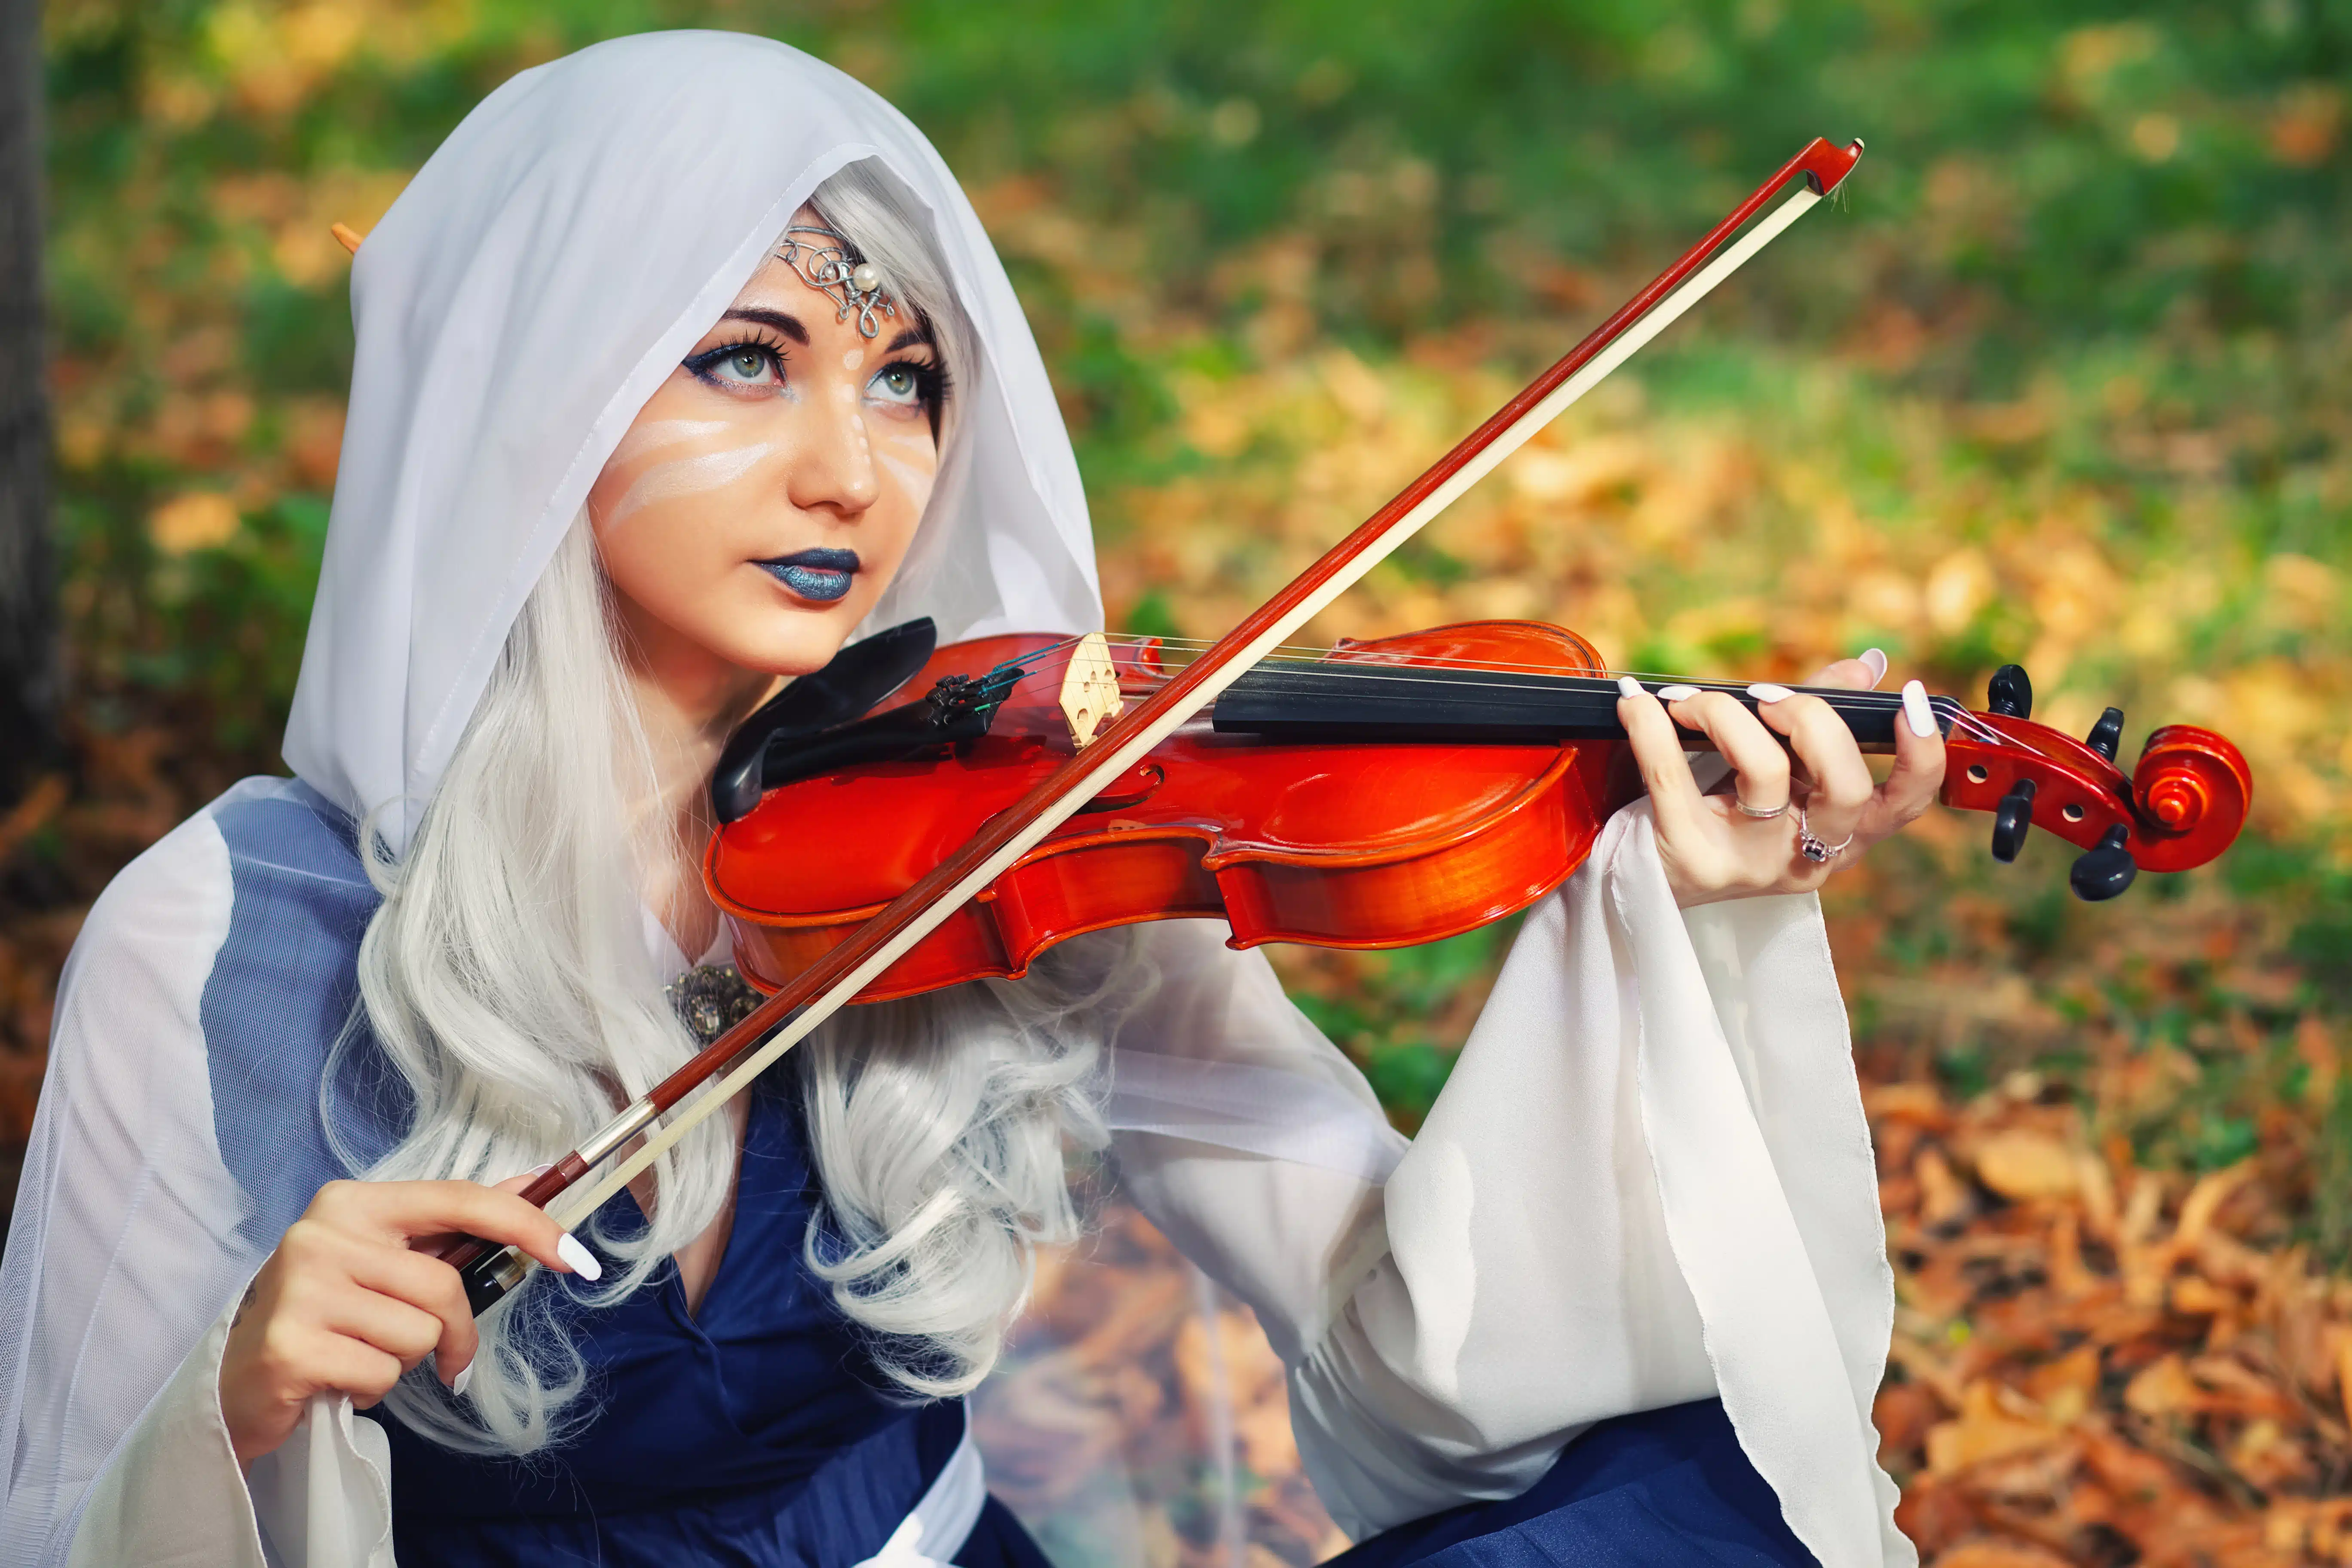 Elf with a violin in the autumn forest. Beautiful Girl In an elf costume playing a musical instrument.